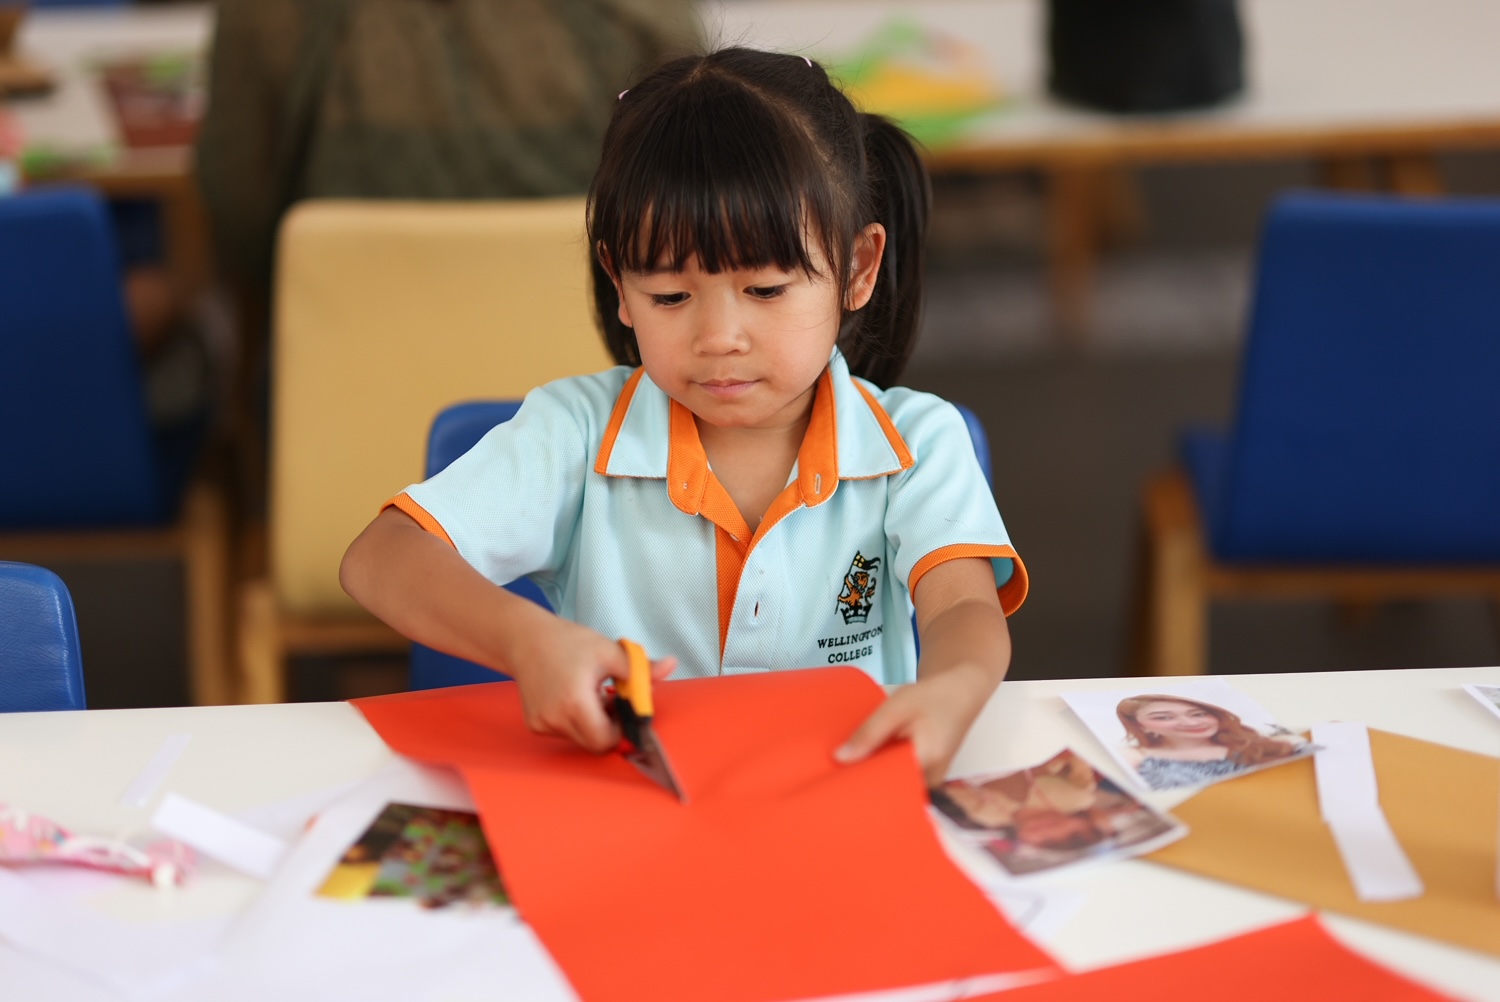 Young girl cutting paper in a school classroom